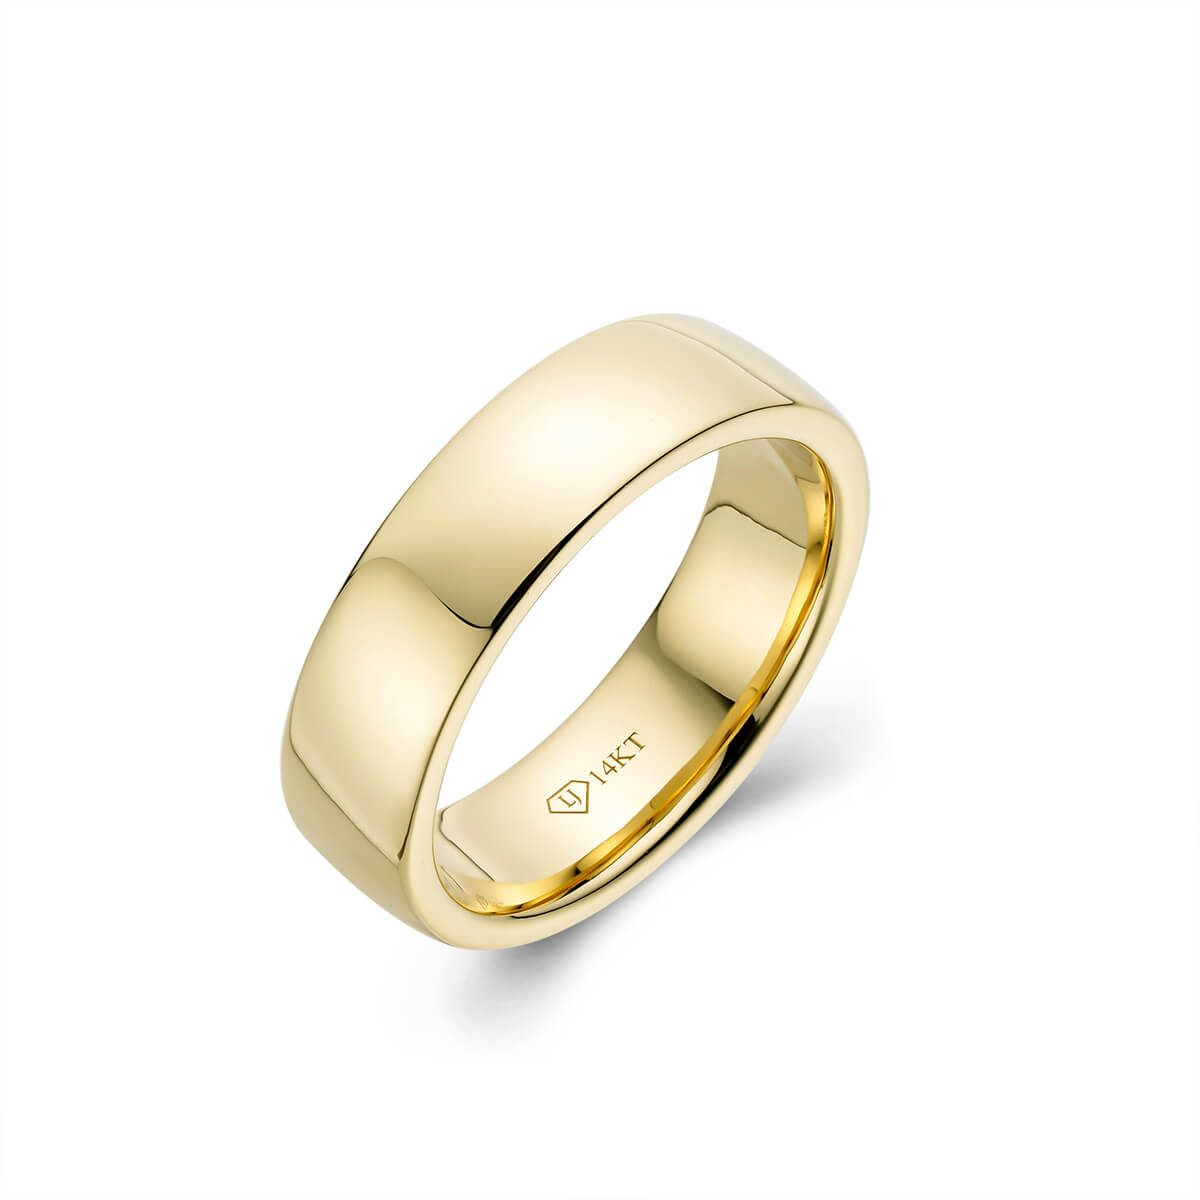 The Stargazer | Men's Gold Wedding Band with Meteorite & Gold Flakes –  Rustic and Main